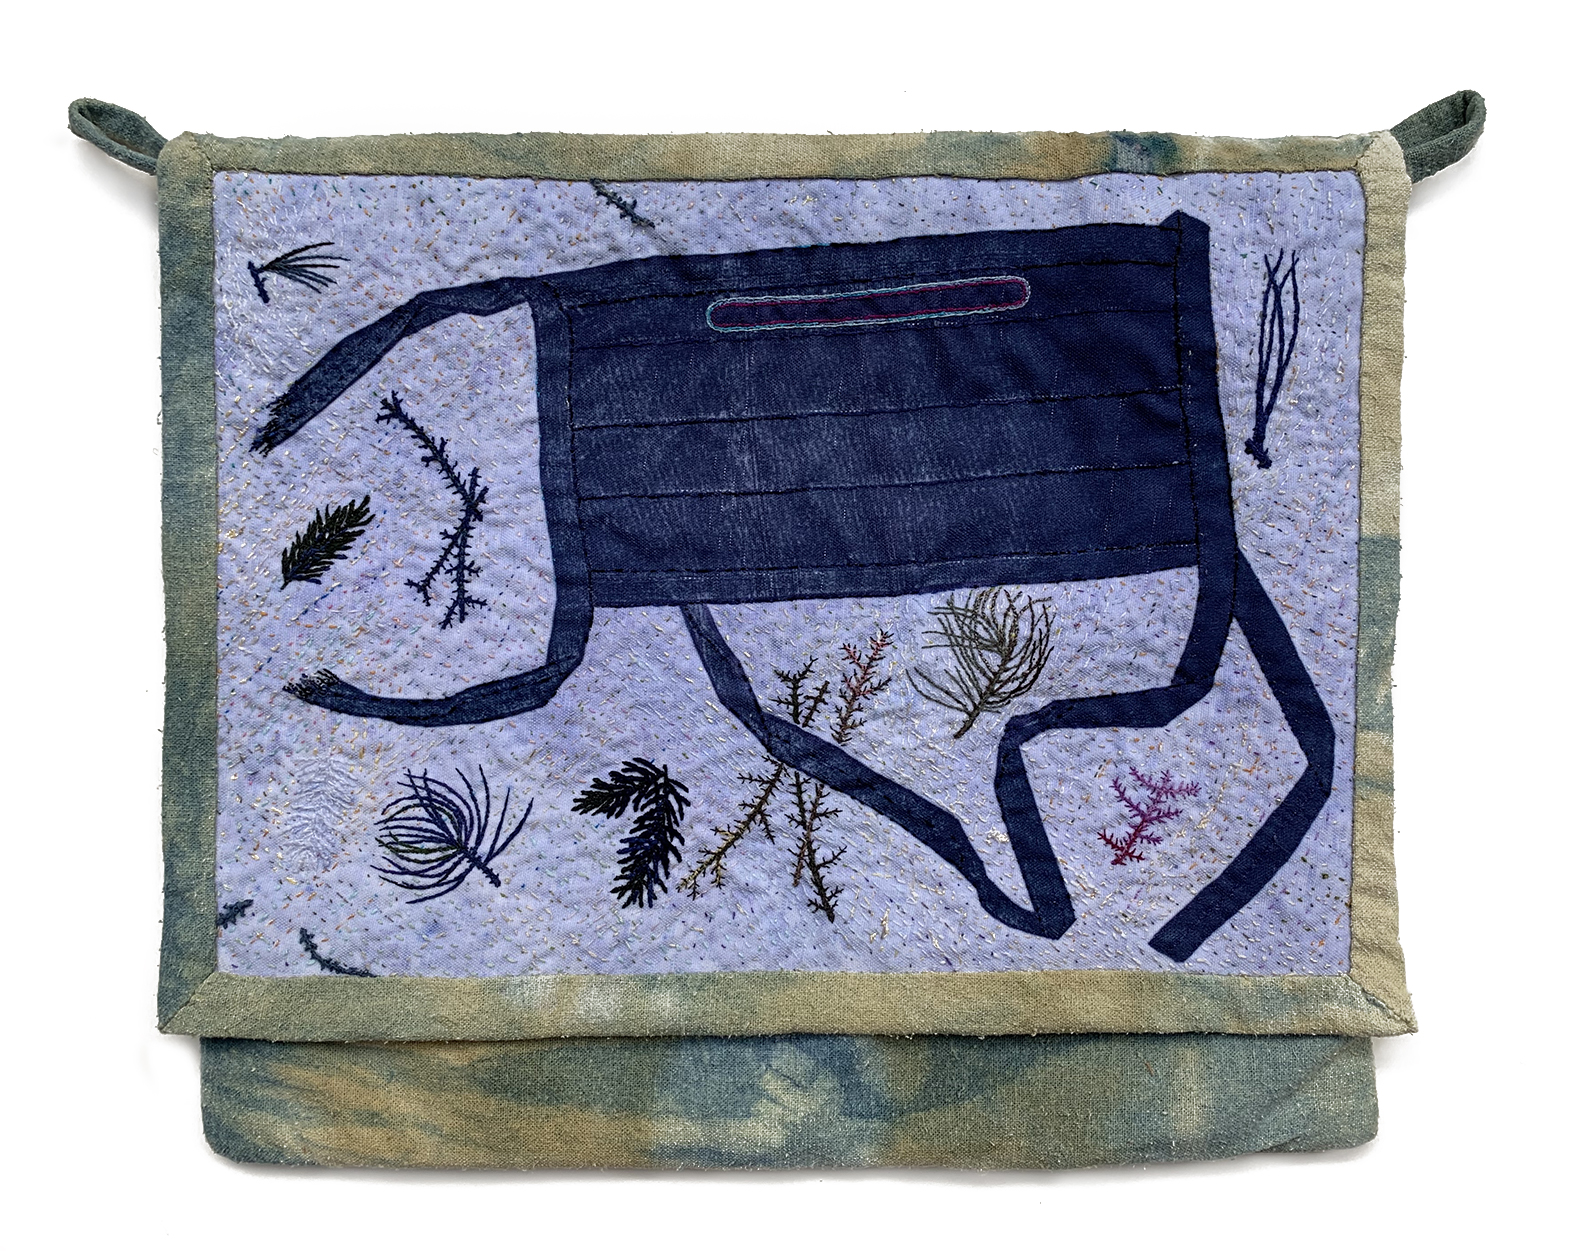 2020 Supply Bag, Bag: raw silk dyed with marigolds and indigo. Front panel: photo transfer, embroidery, and fabric paint on polyester. 10 1/4” x 12 1/4”.